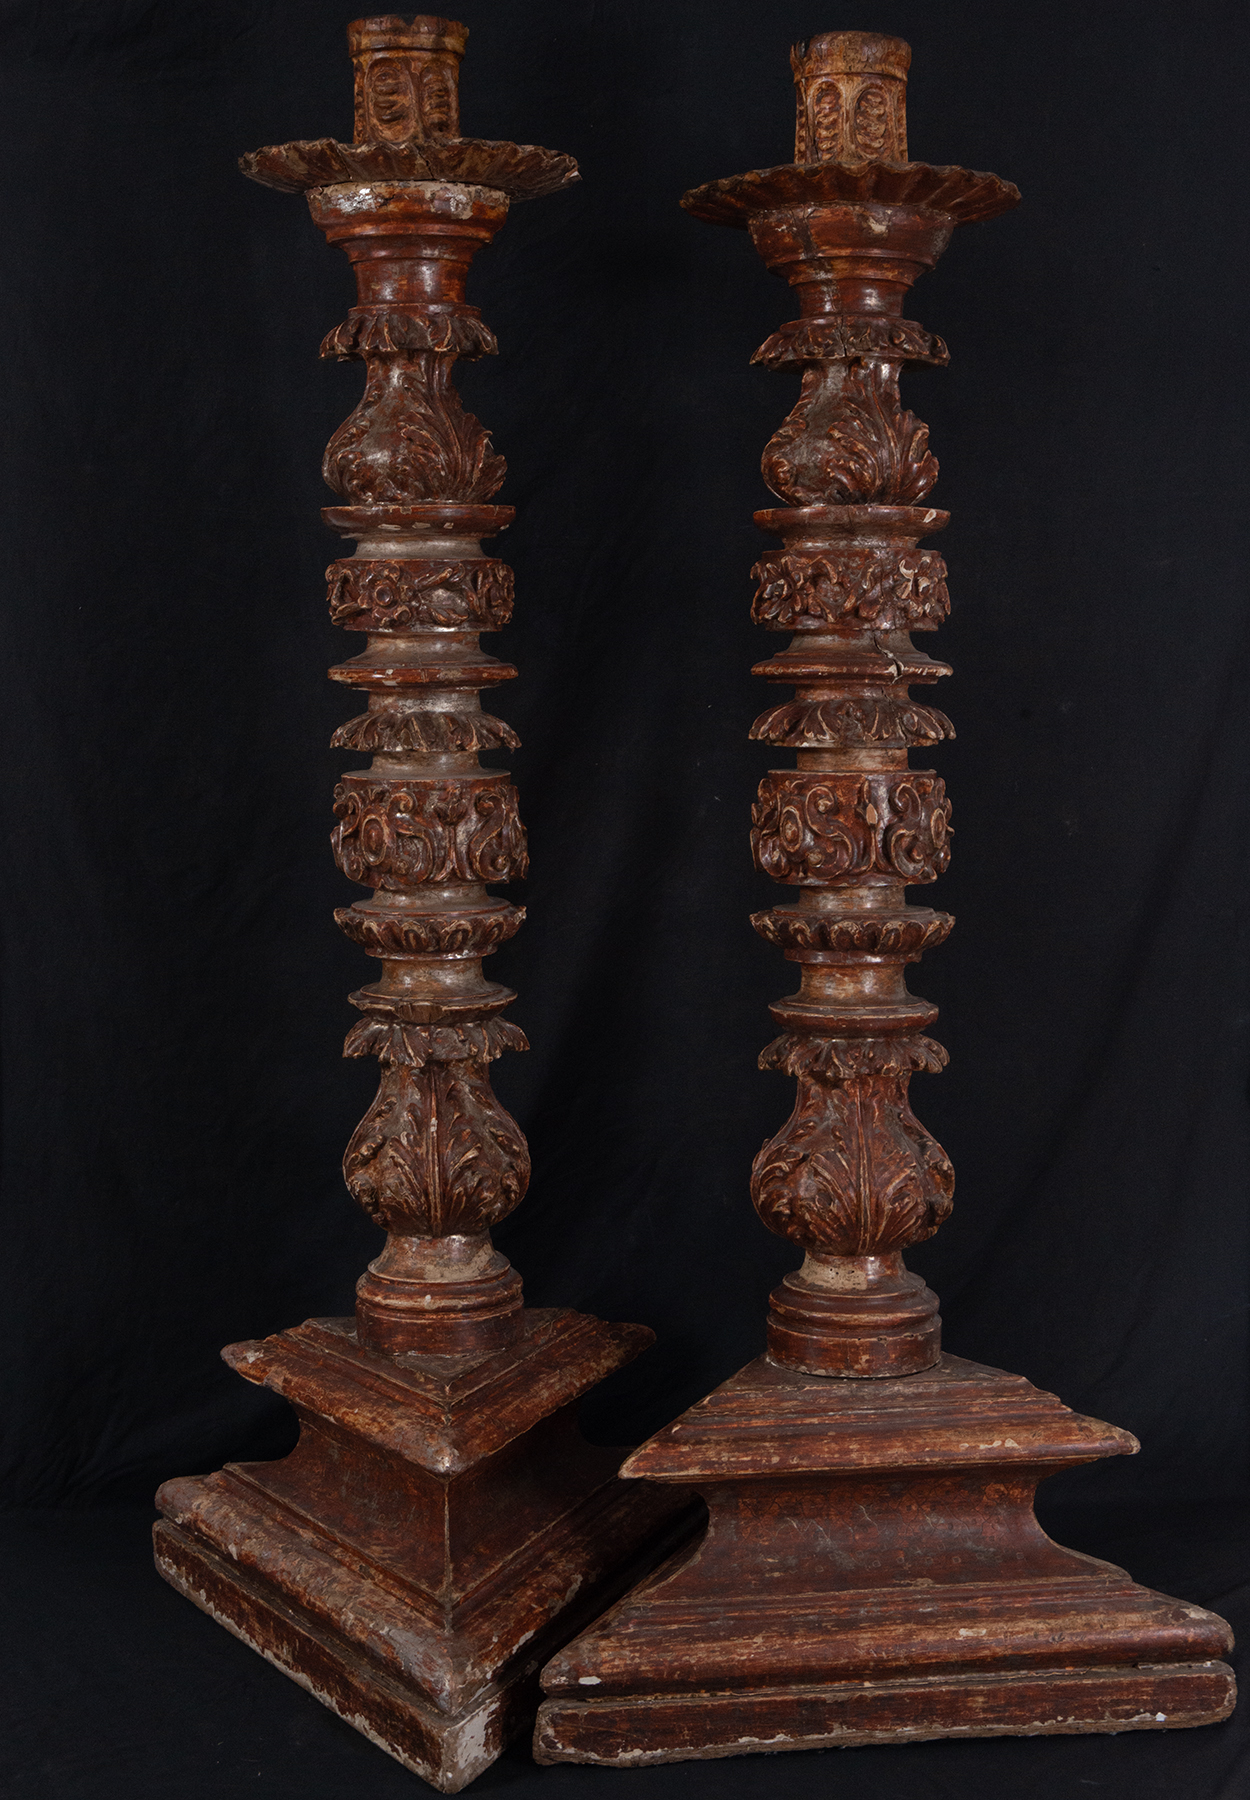 Important Large Pair of Colonial Torcheros from the 17th century, silver sgraffito, Mexico, Viceroya